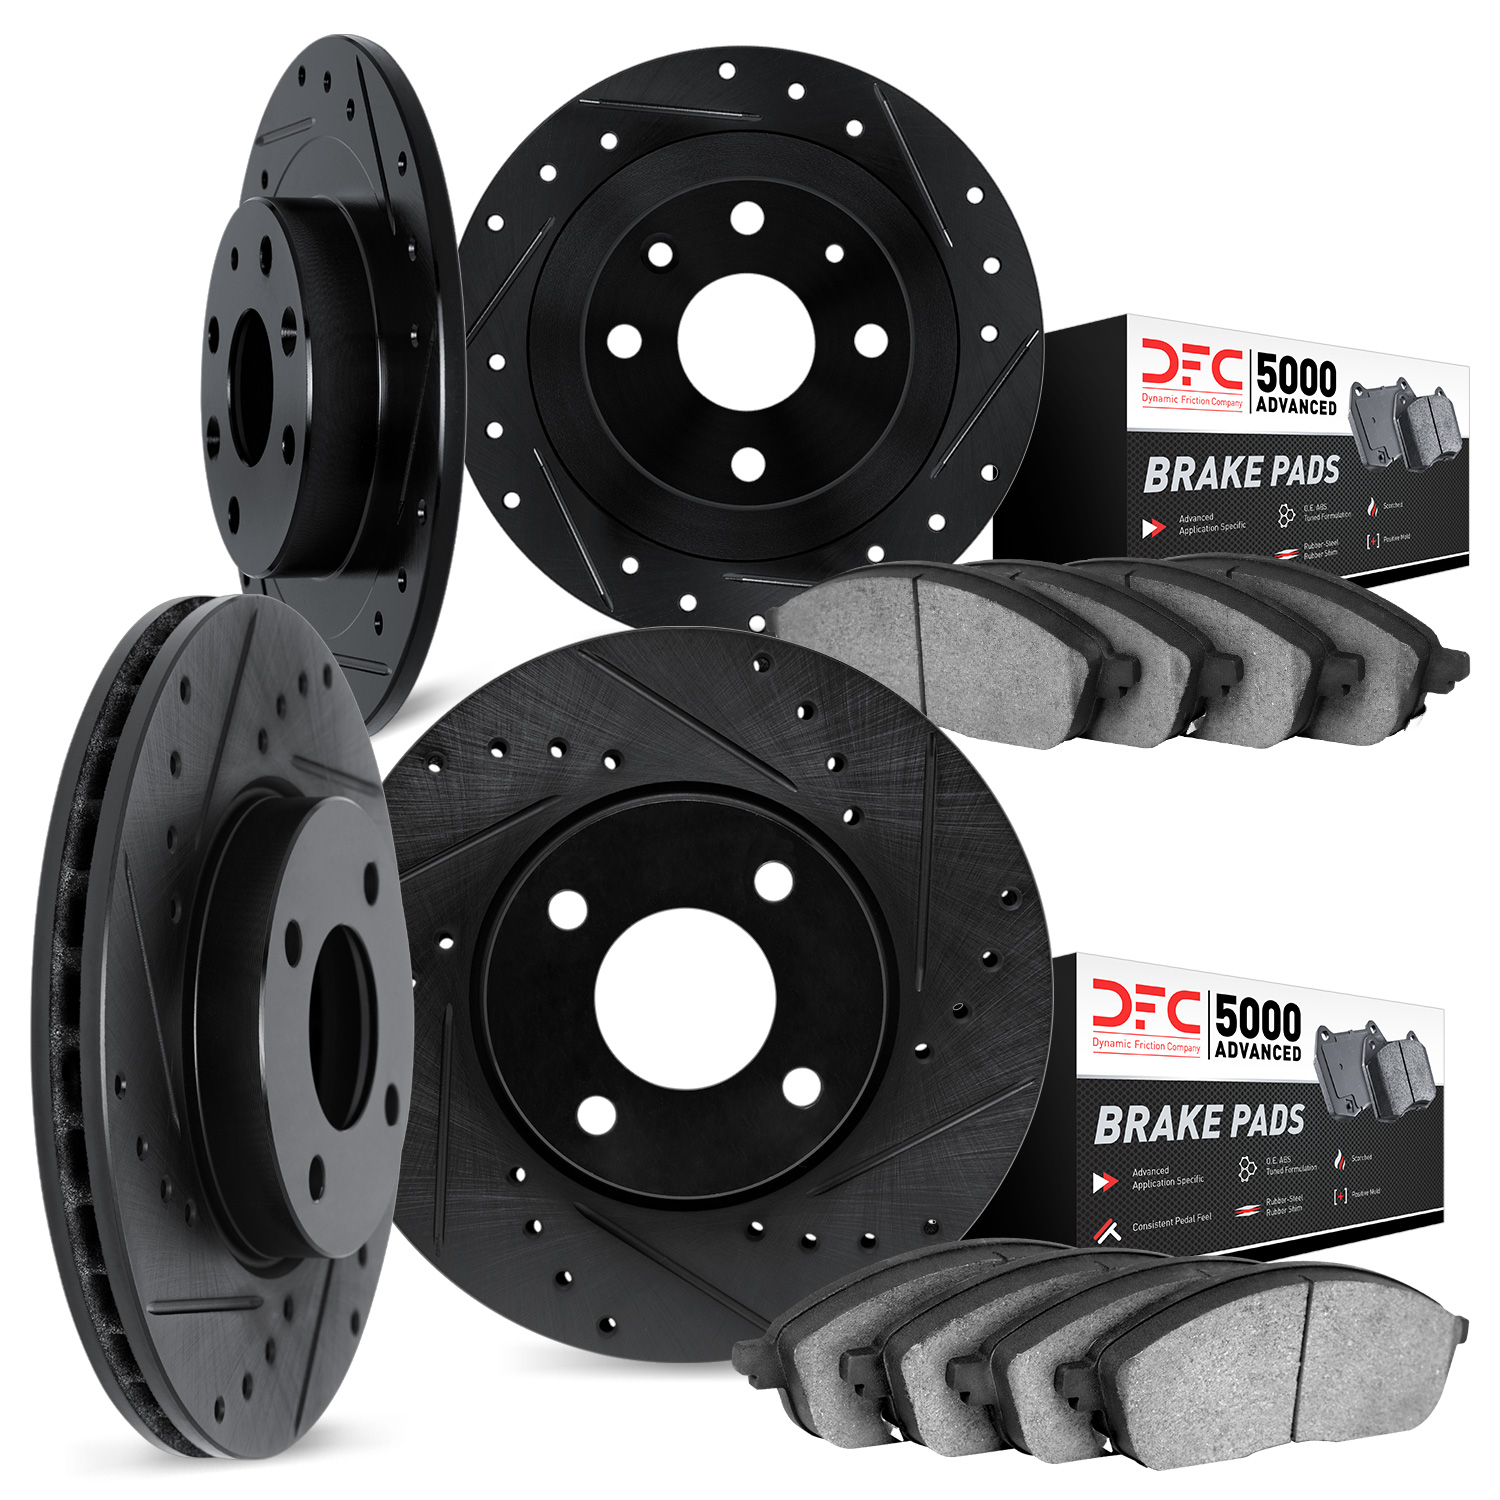 8504-28003 Drilled/Slotted Brake Rotors w/5000 Advanced Brake Pads Kit [Black], 1977-1986 Peugeot, Position: Front and Rear